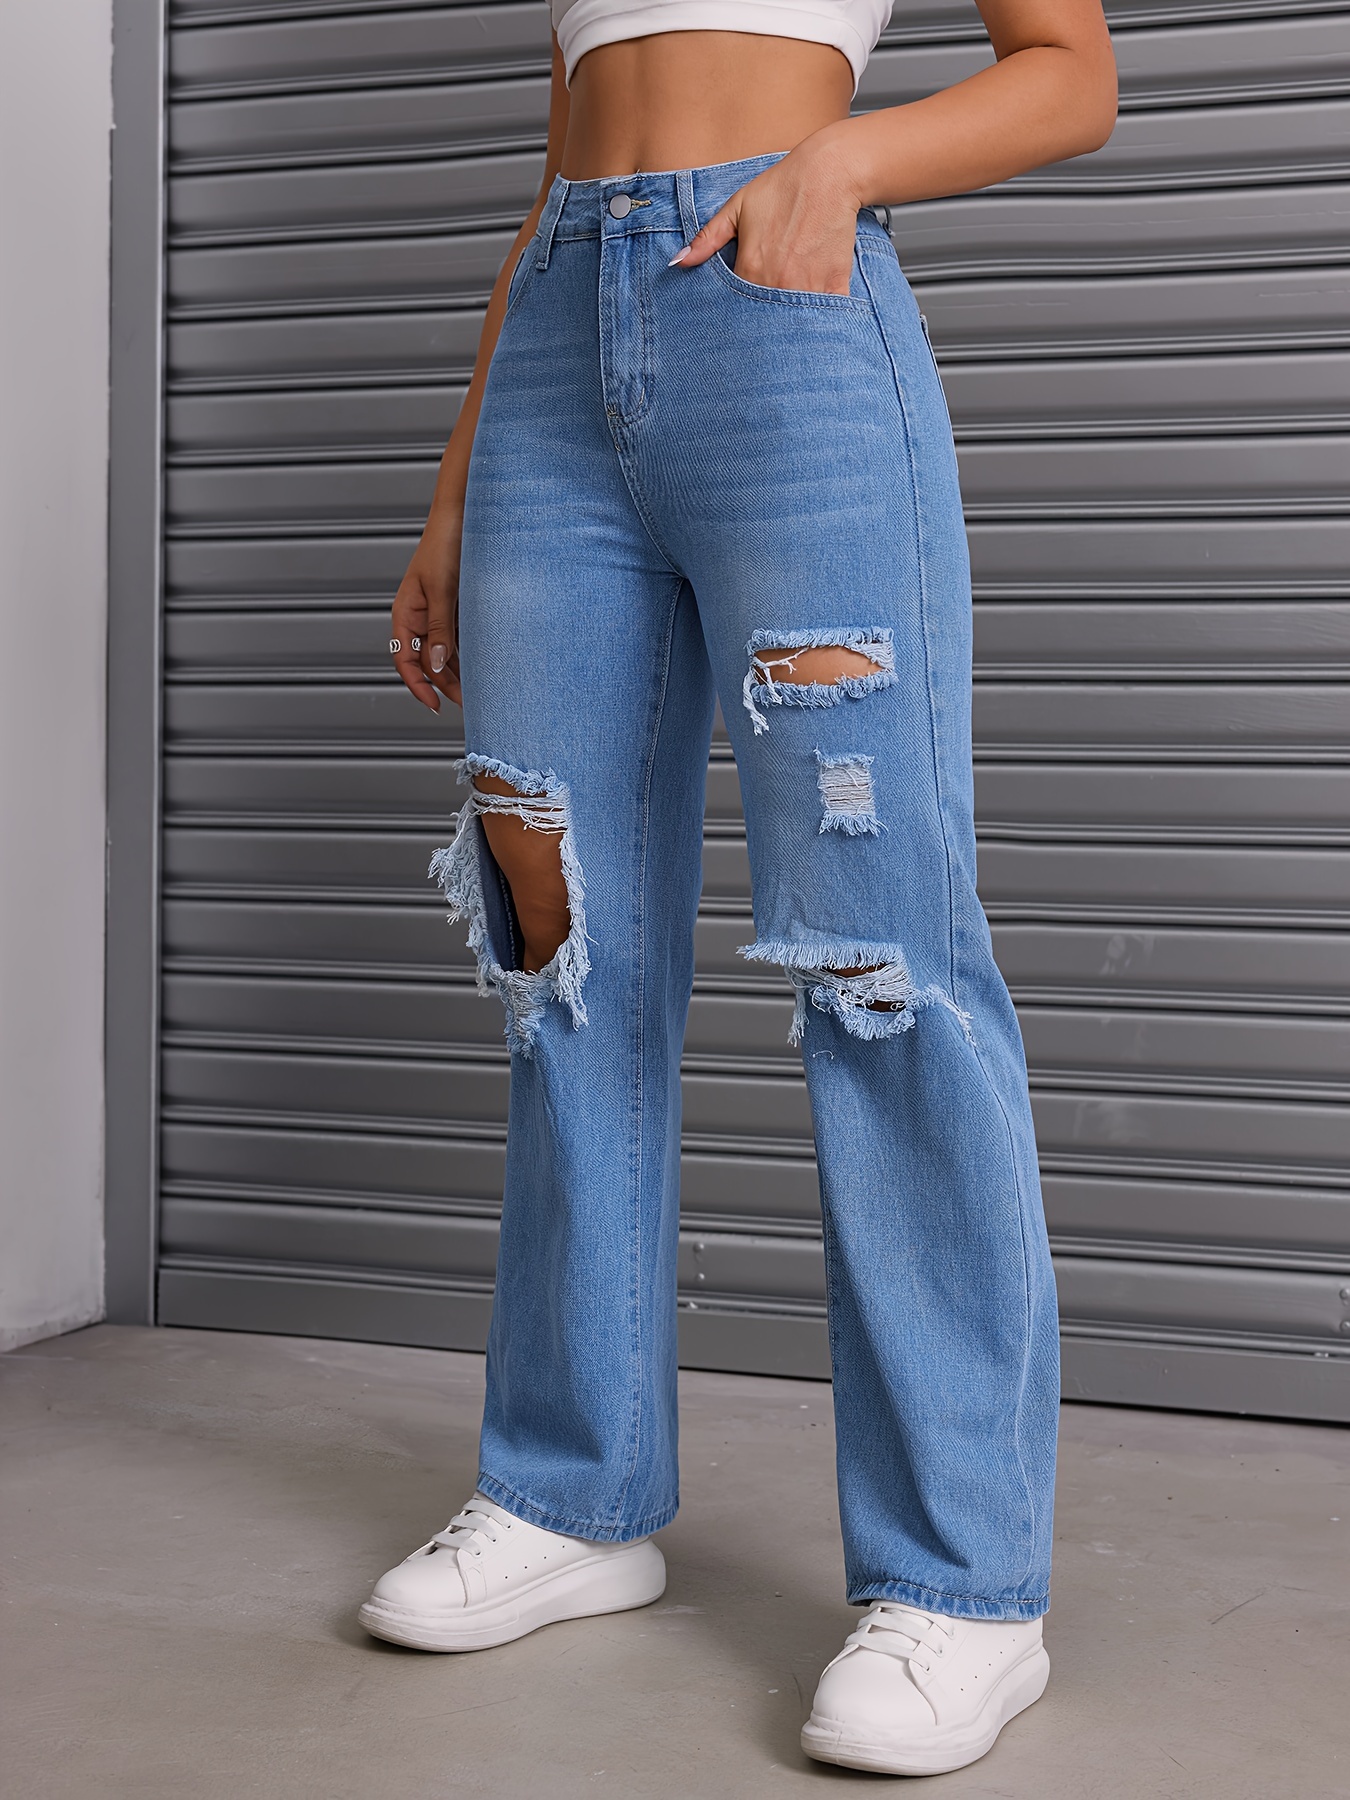 Ripped Straight Leg Loose Fit Jeans, High Rise Wide Legs Distressed Denim  Pants, Women's Denim Jeans & Clothing